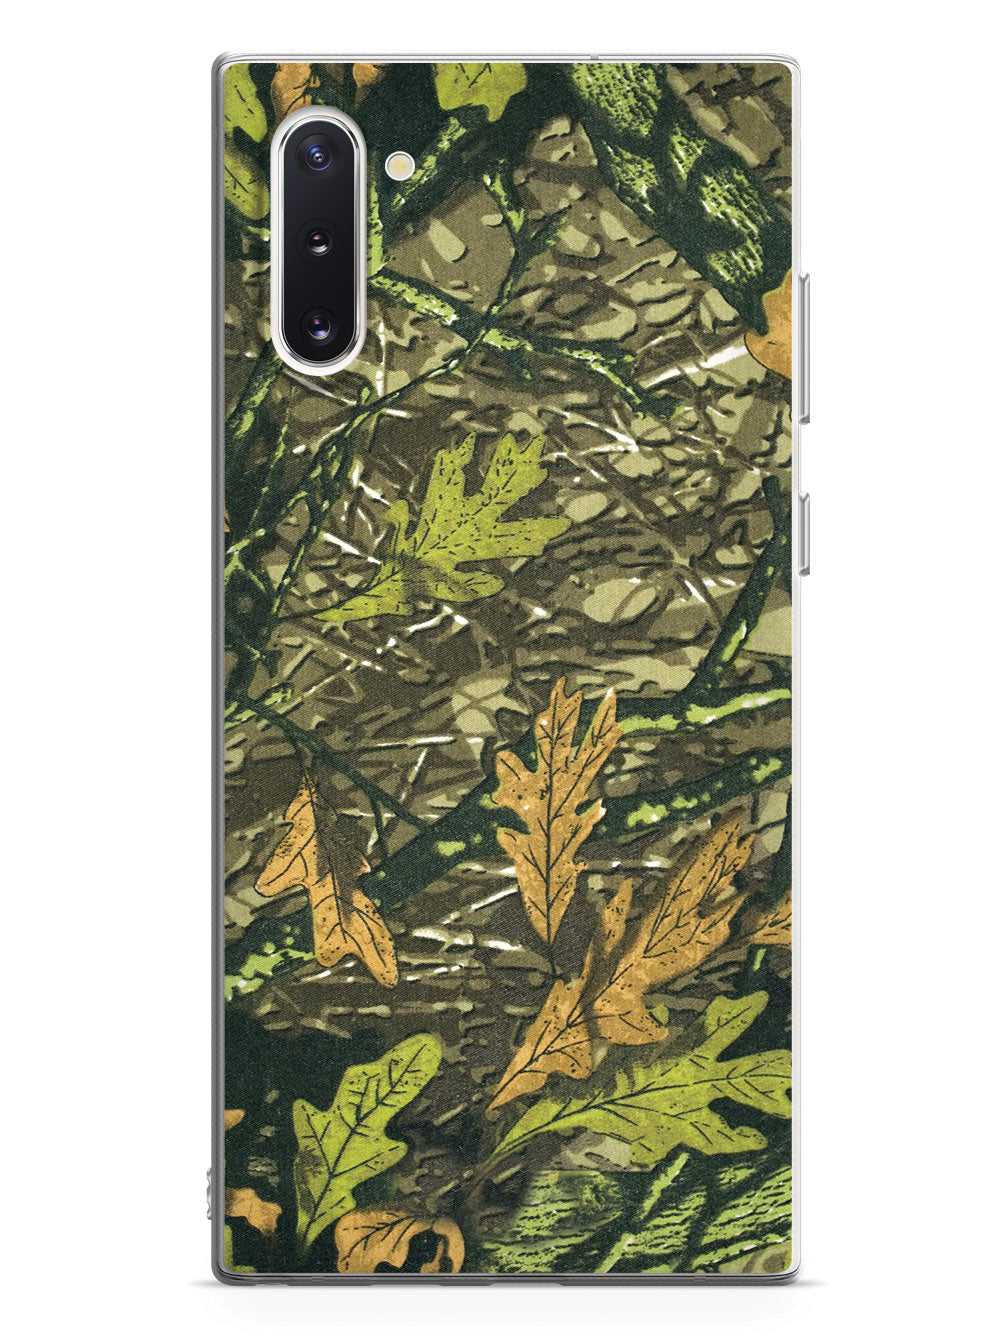 Green Hunter Camouflage Case